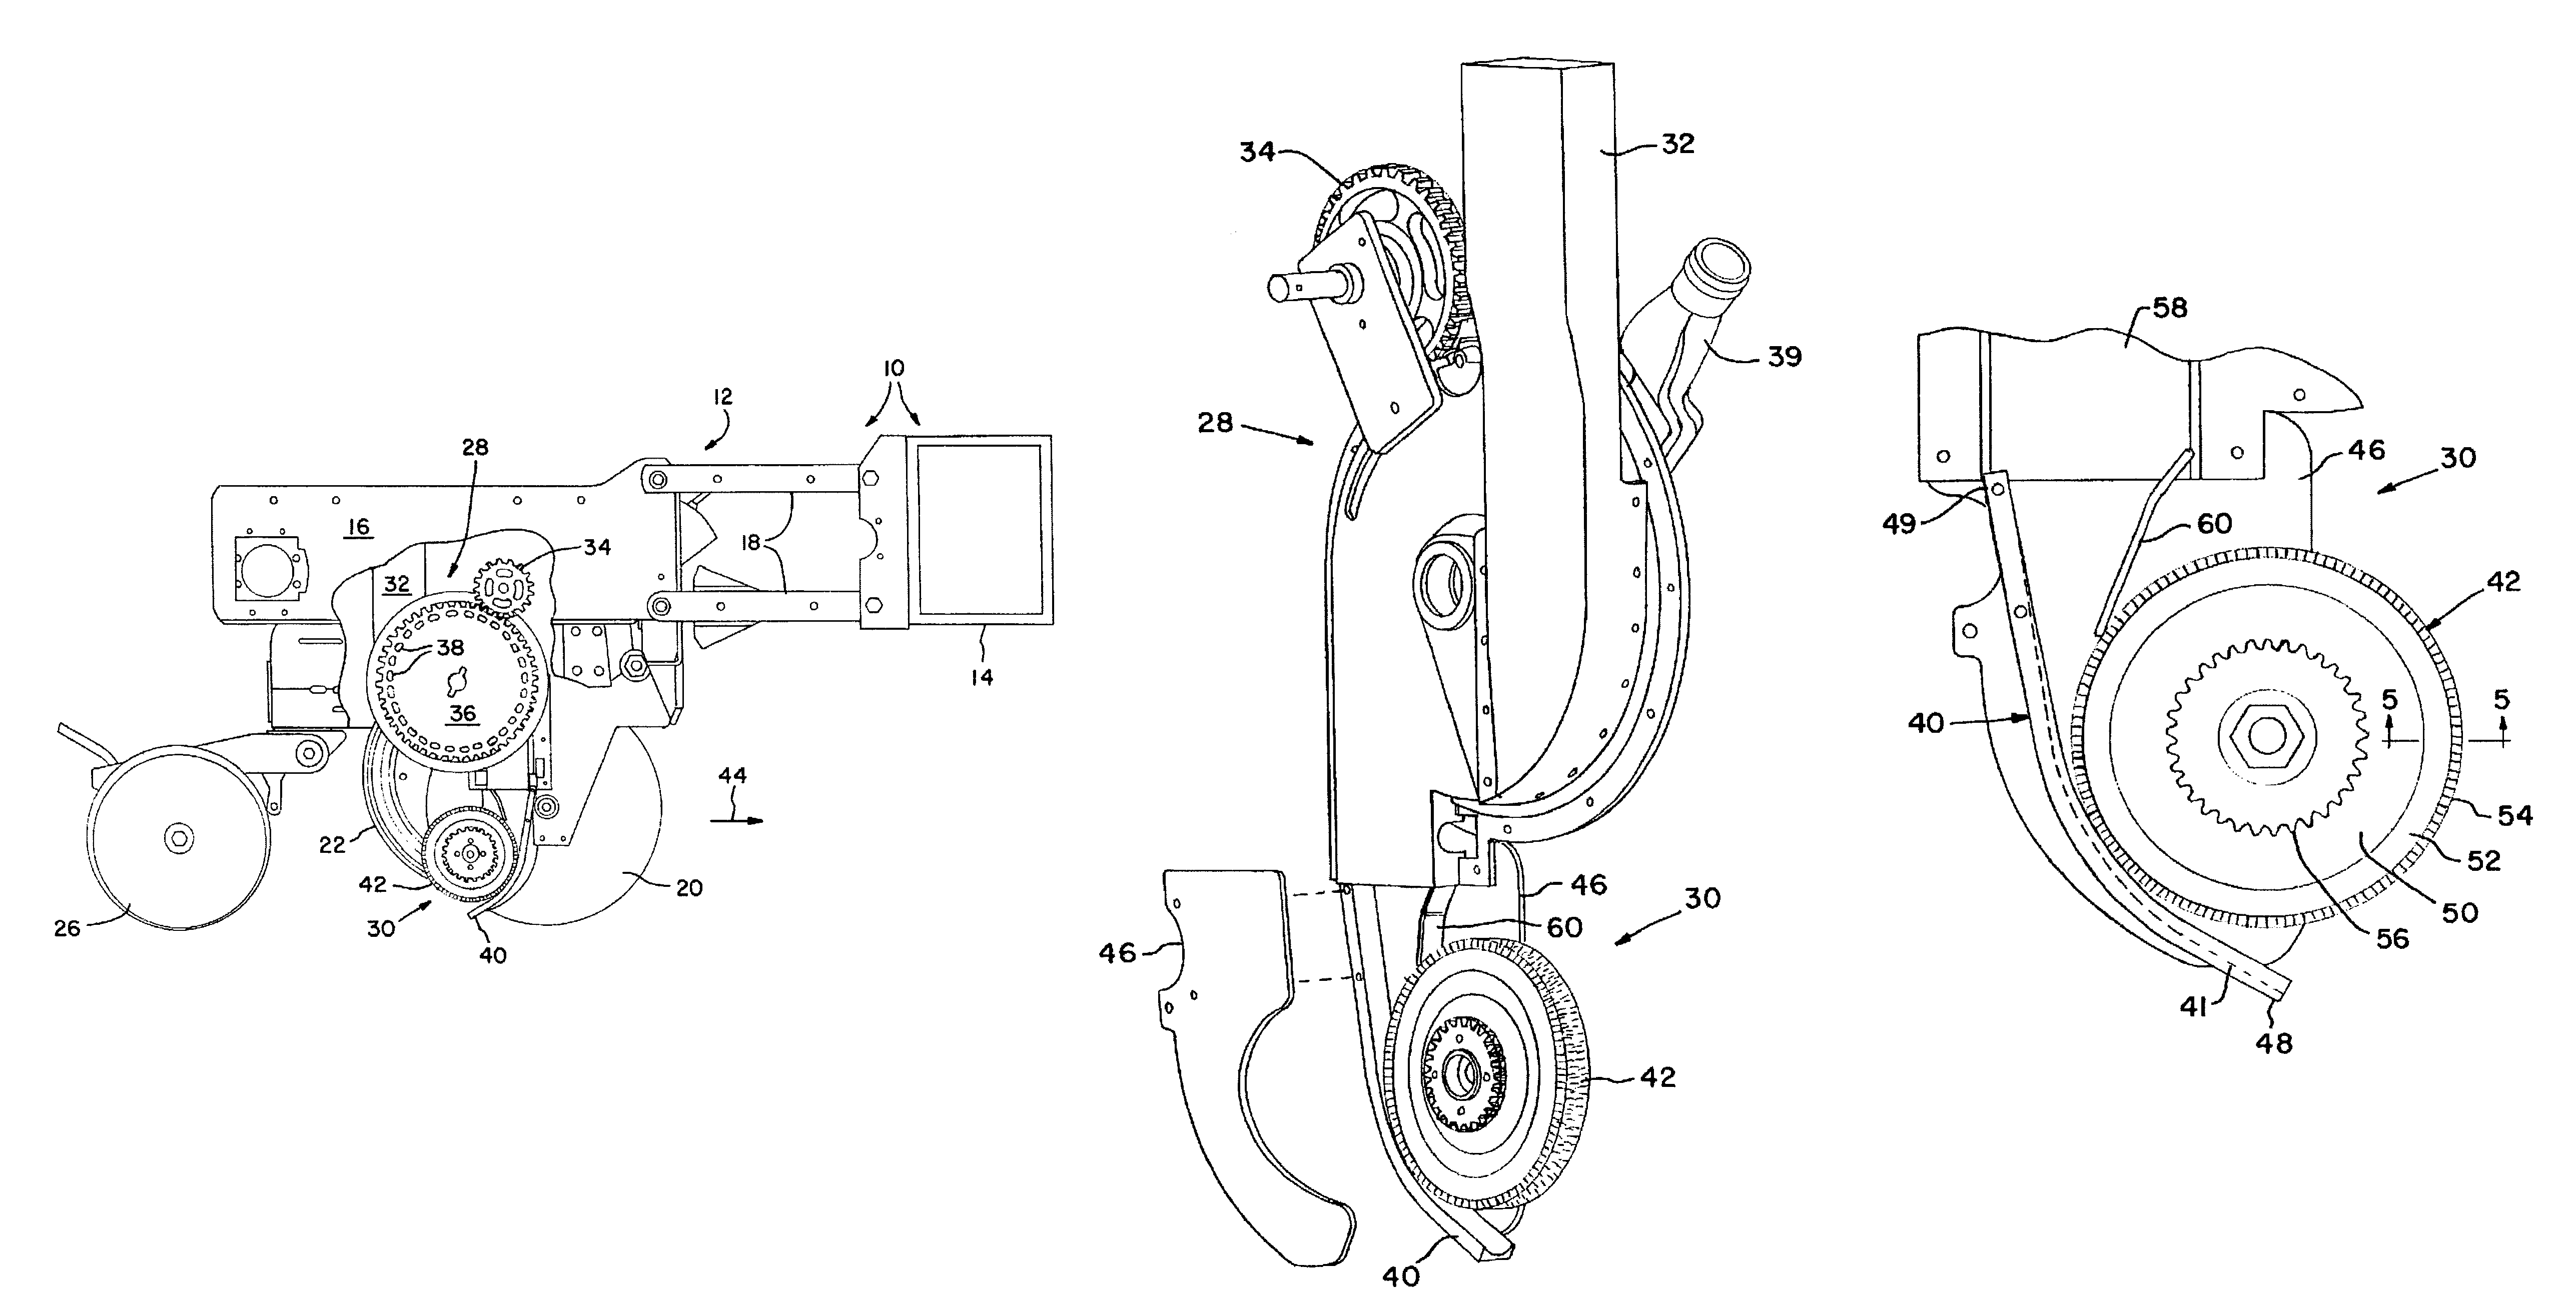 Seed placement system for use in a seeding machine